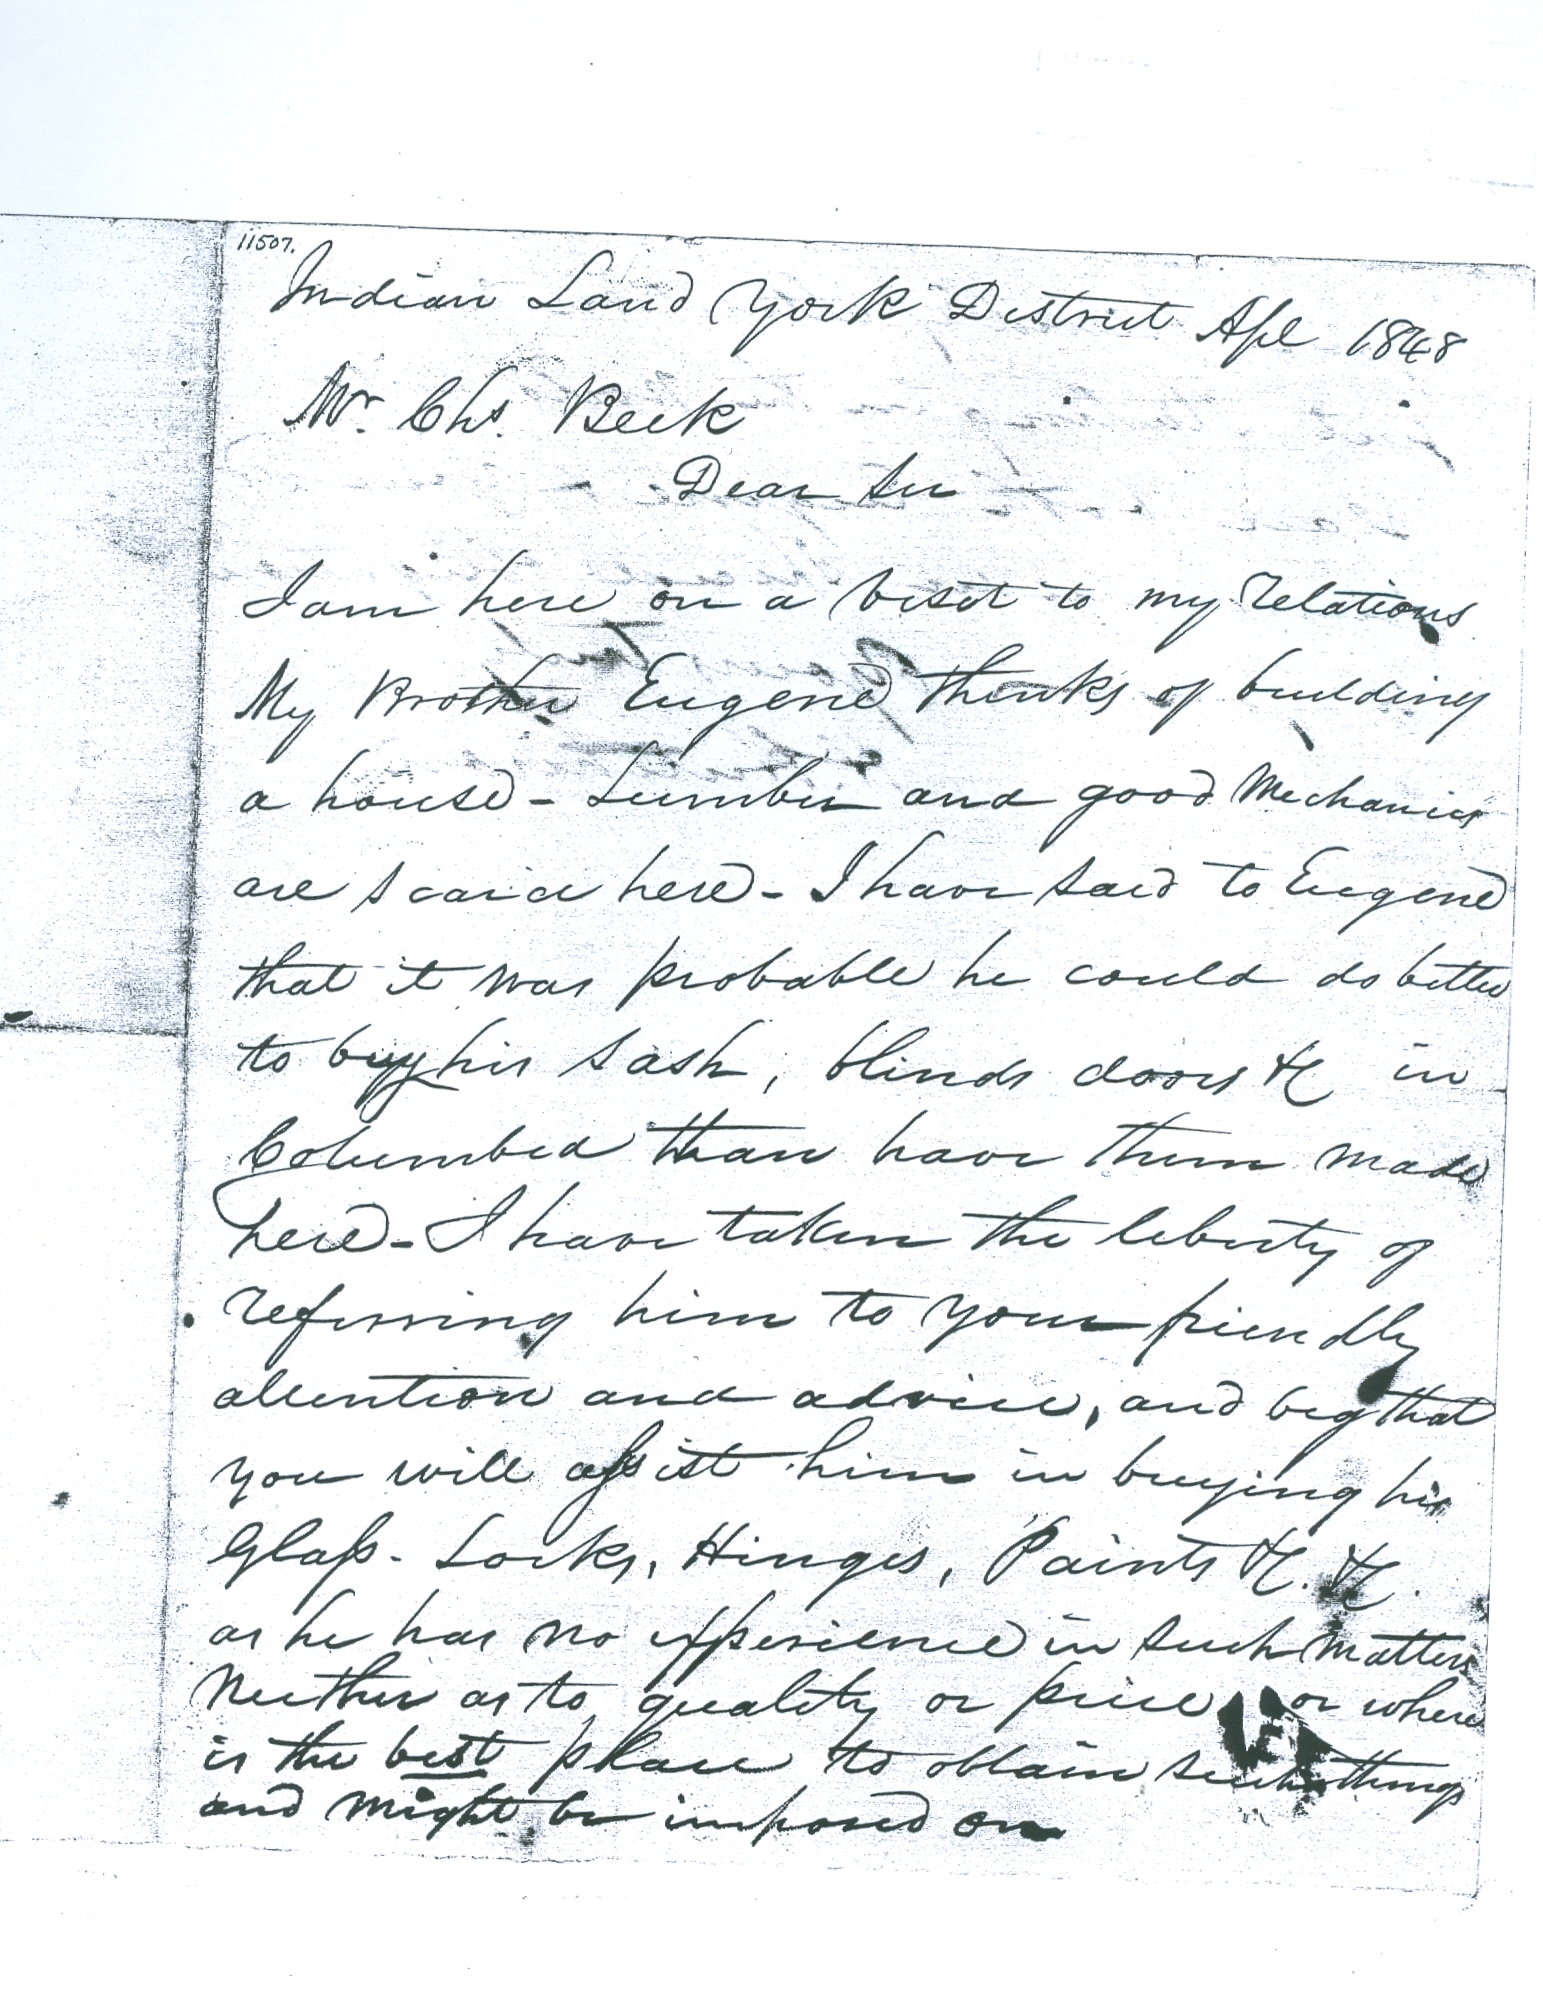 Letter written to Columbia contractor - mechanic, Charles Beck by Hiram Hutchison on behalf of his brother looking for a skilled mechanic. Courtesy of the White Family Collection, 2008